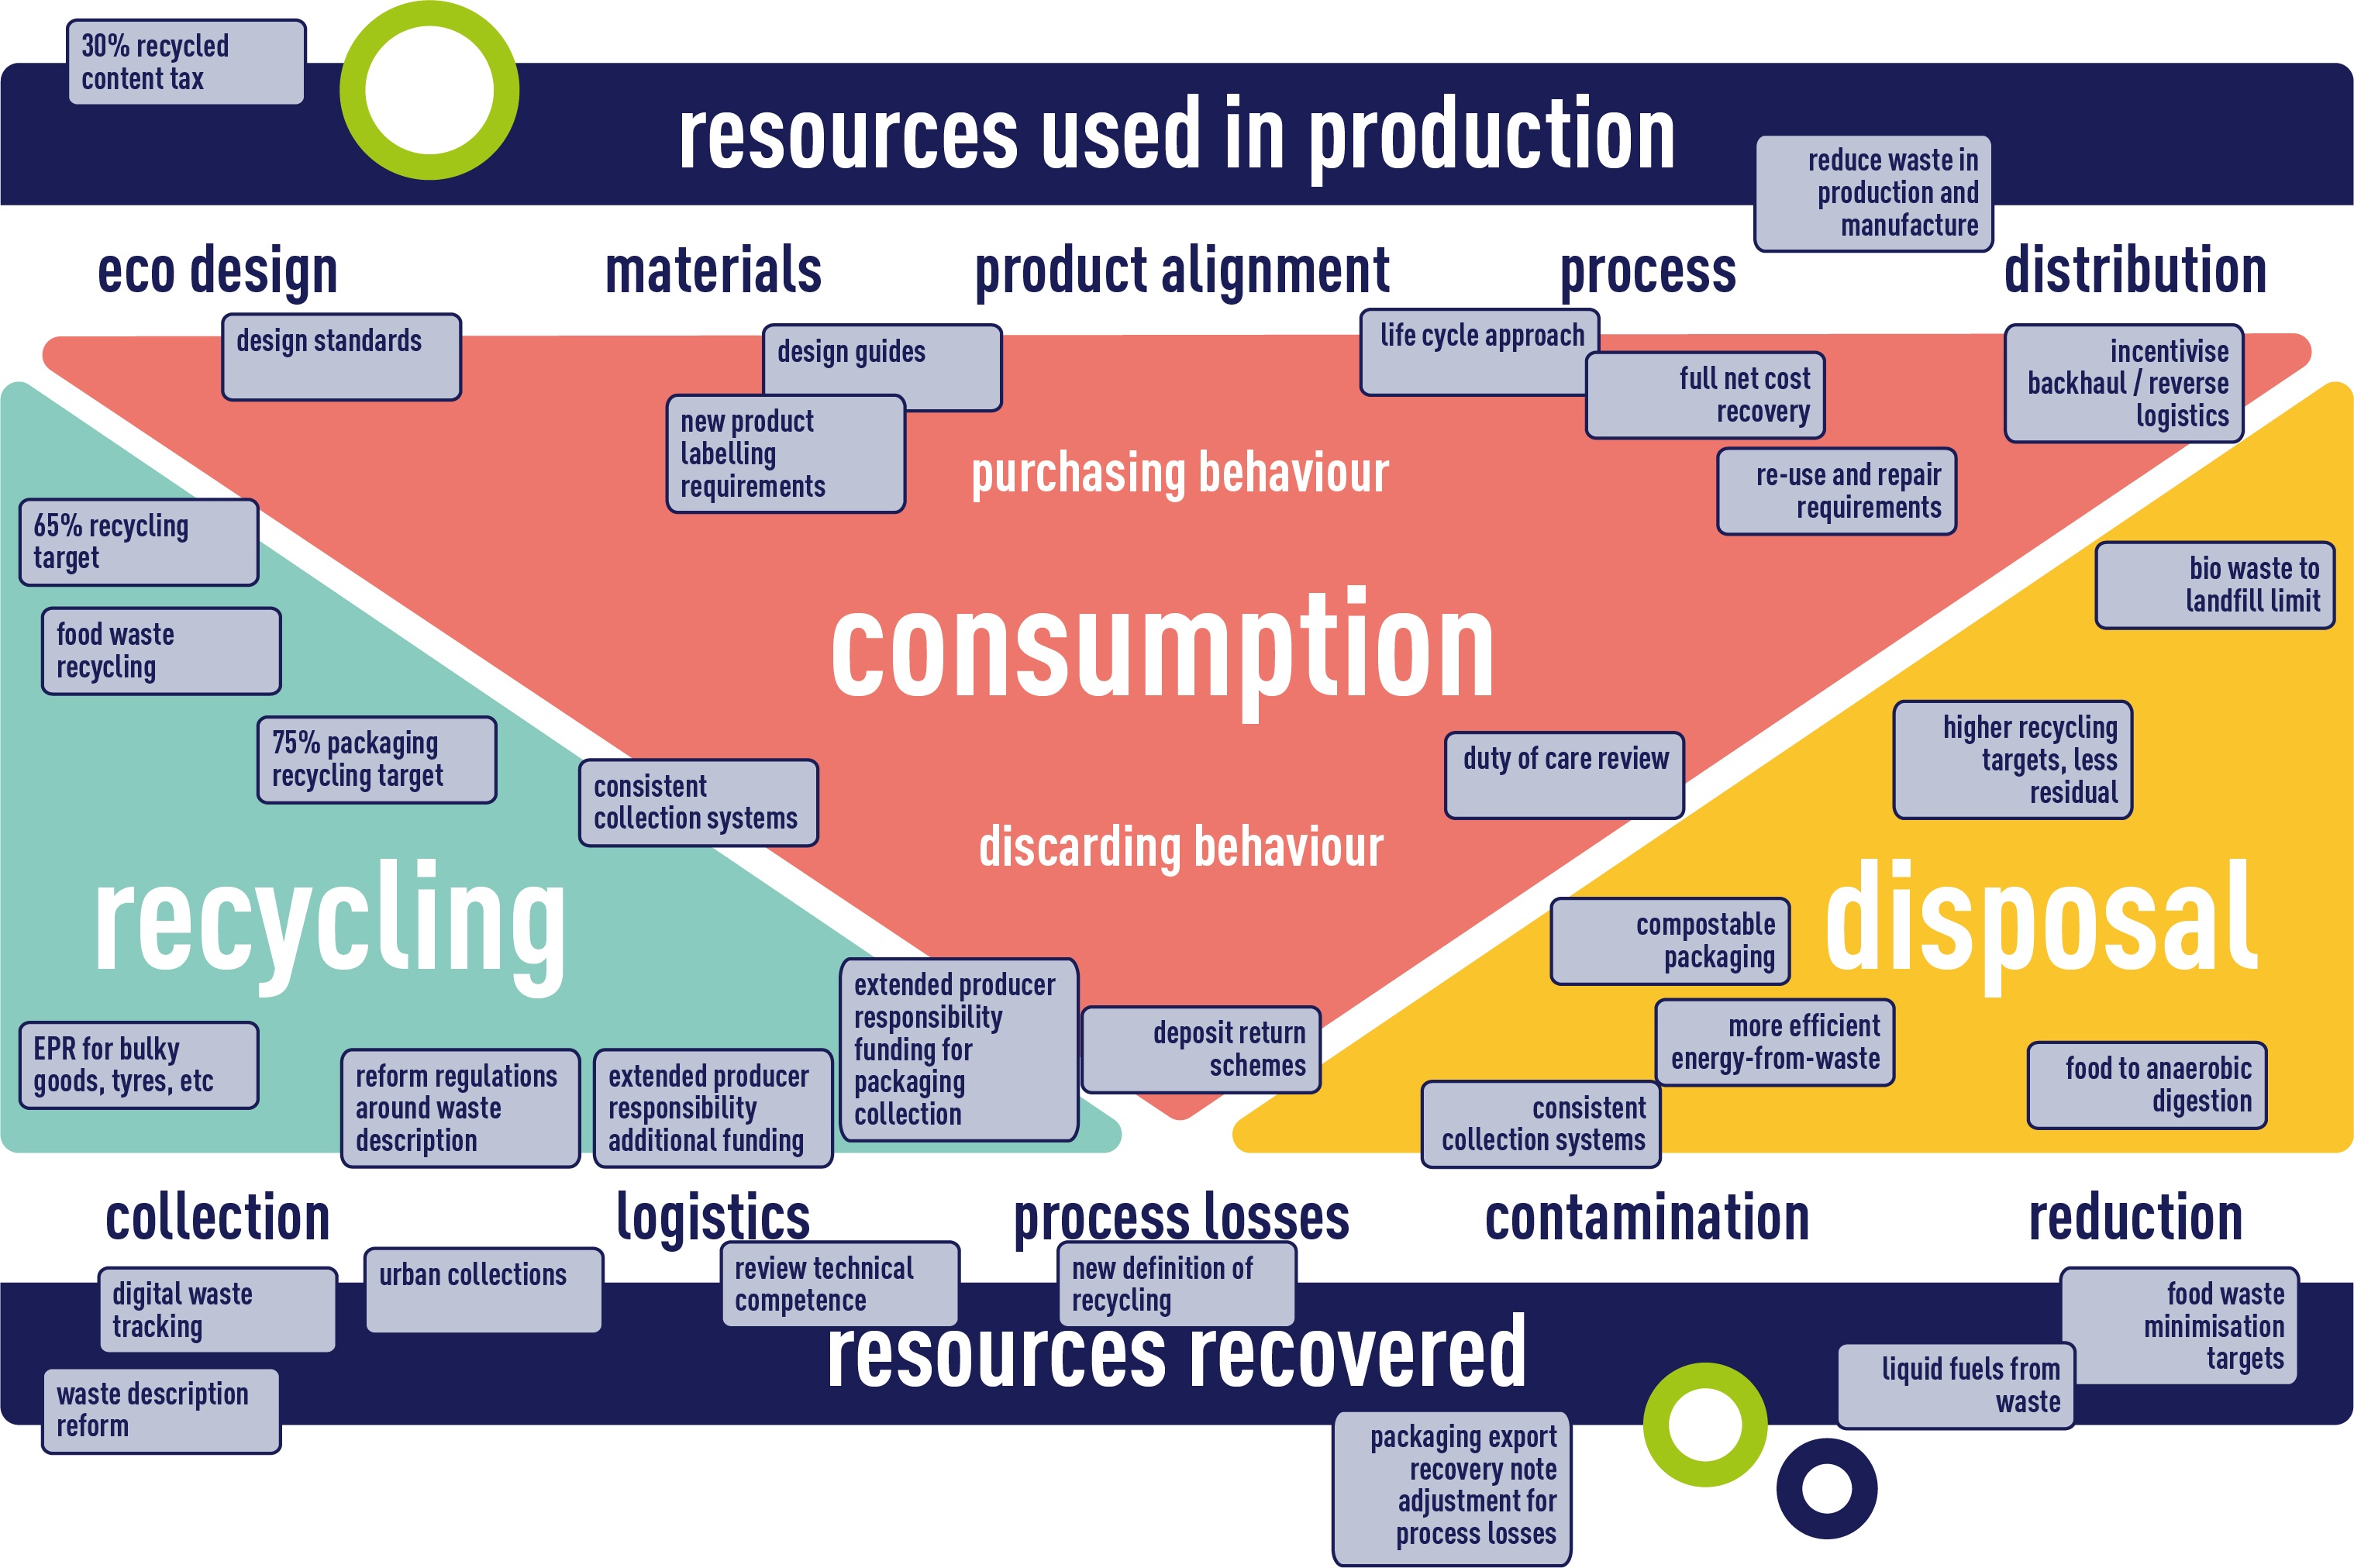 SUEZ_Resources_Used_In_Production